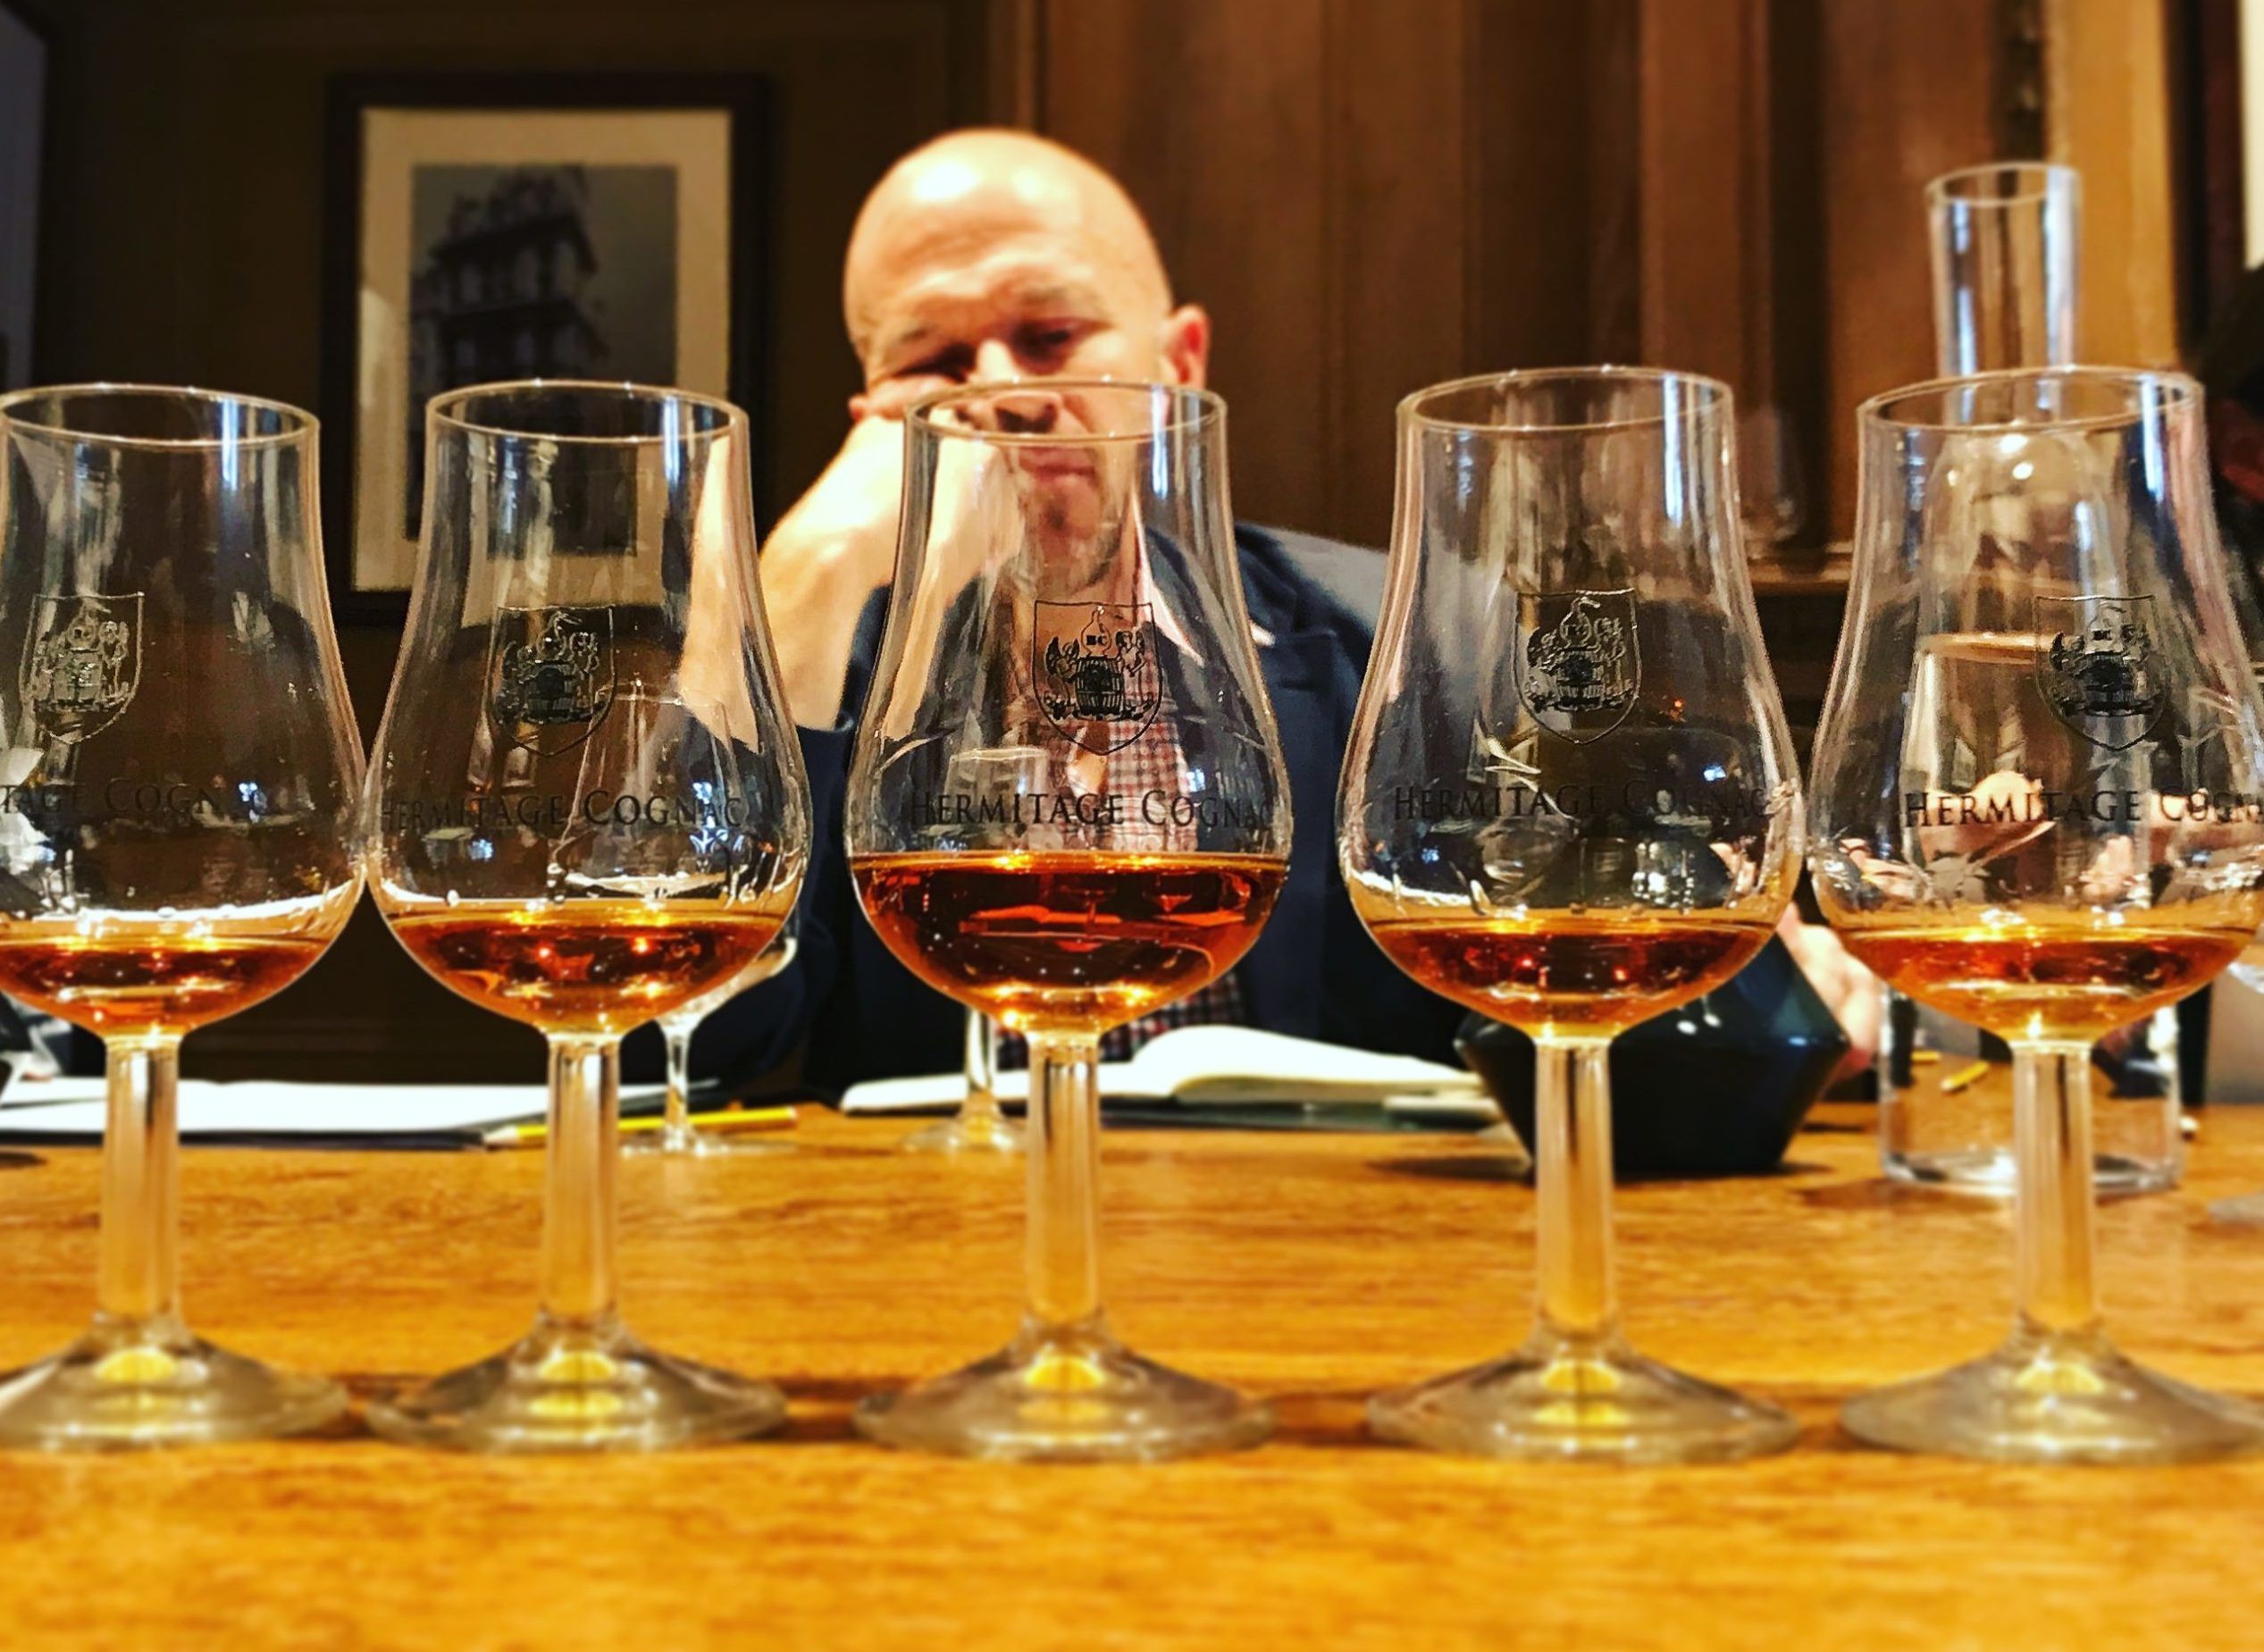 Why Hermitage’s David Baker thinks cognac gets a rough deal